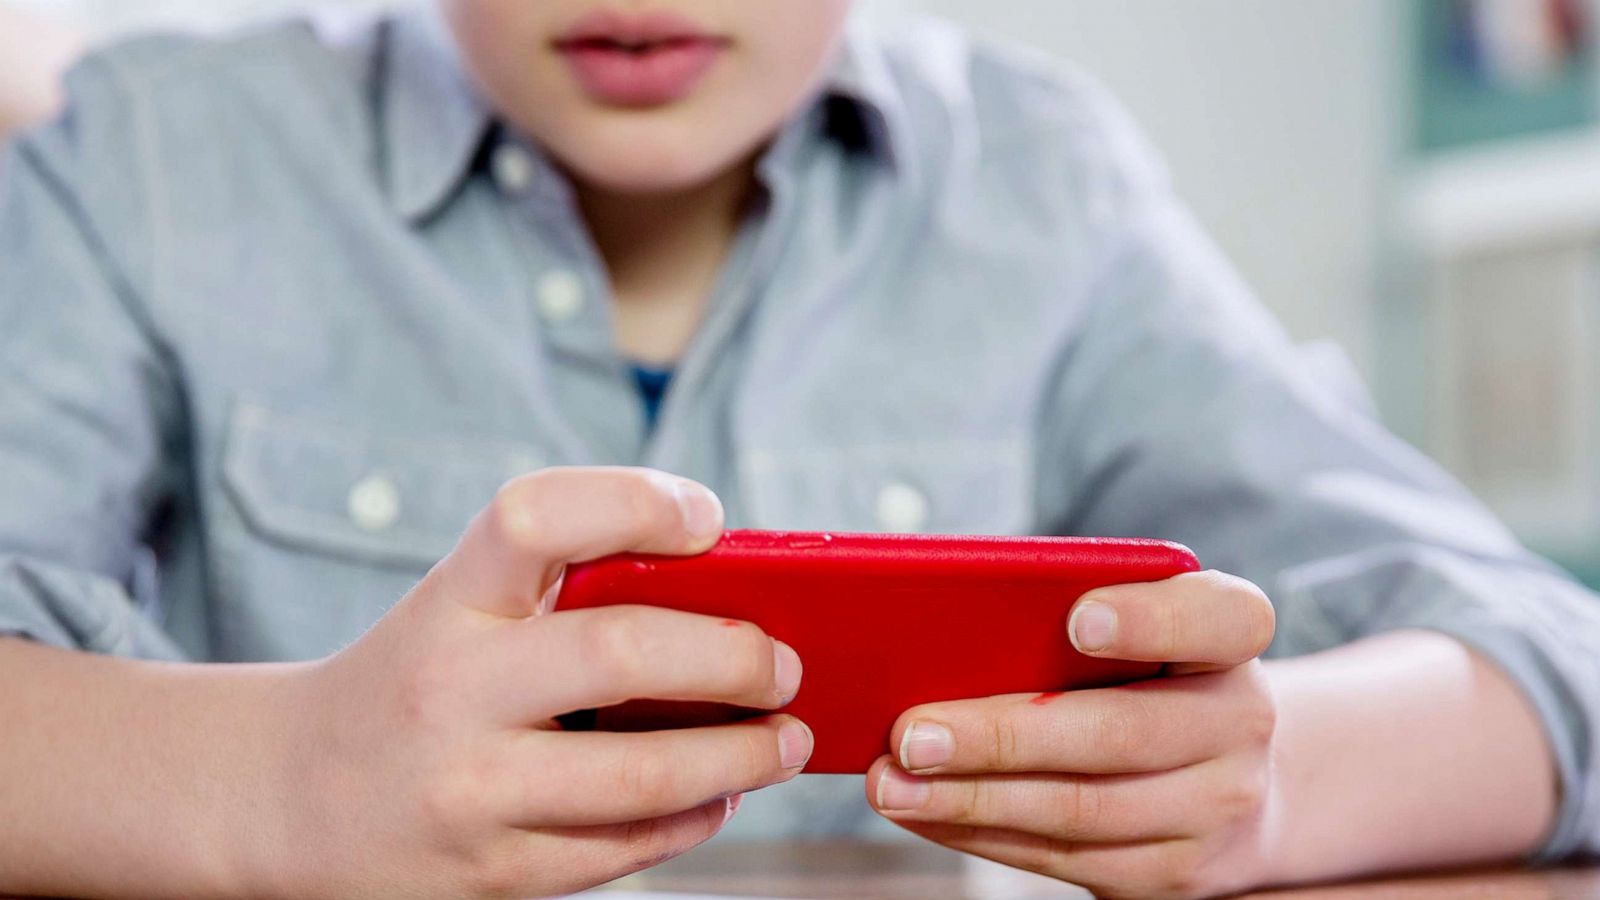 PHOTO: A boy uses a hand-held device in this undated stock photo.